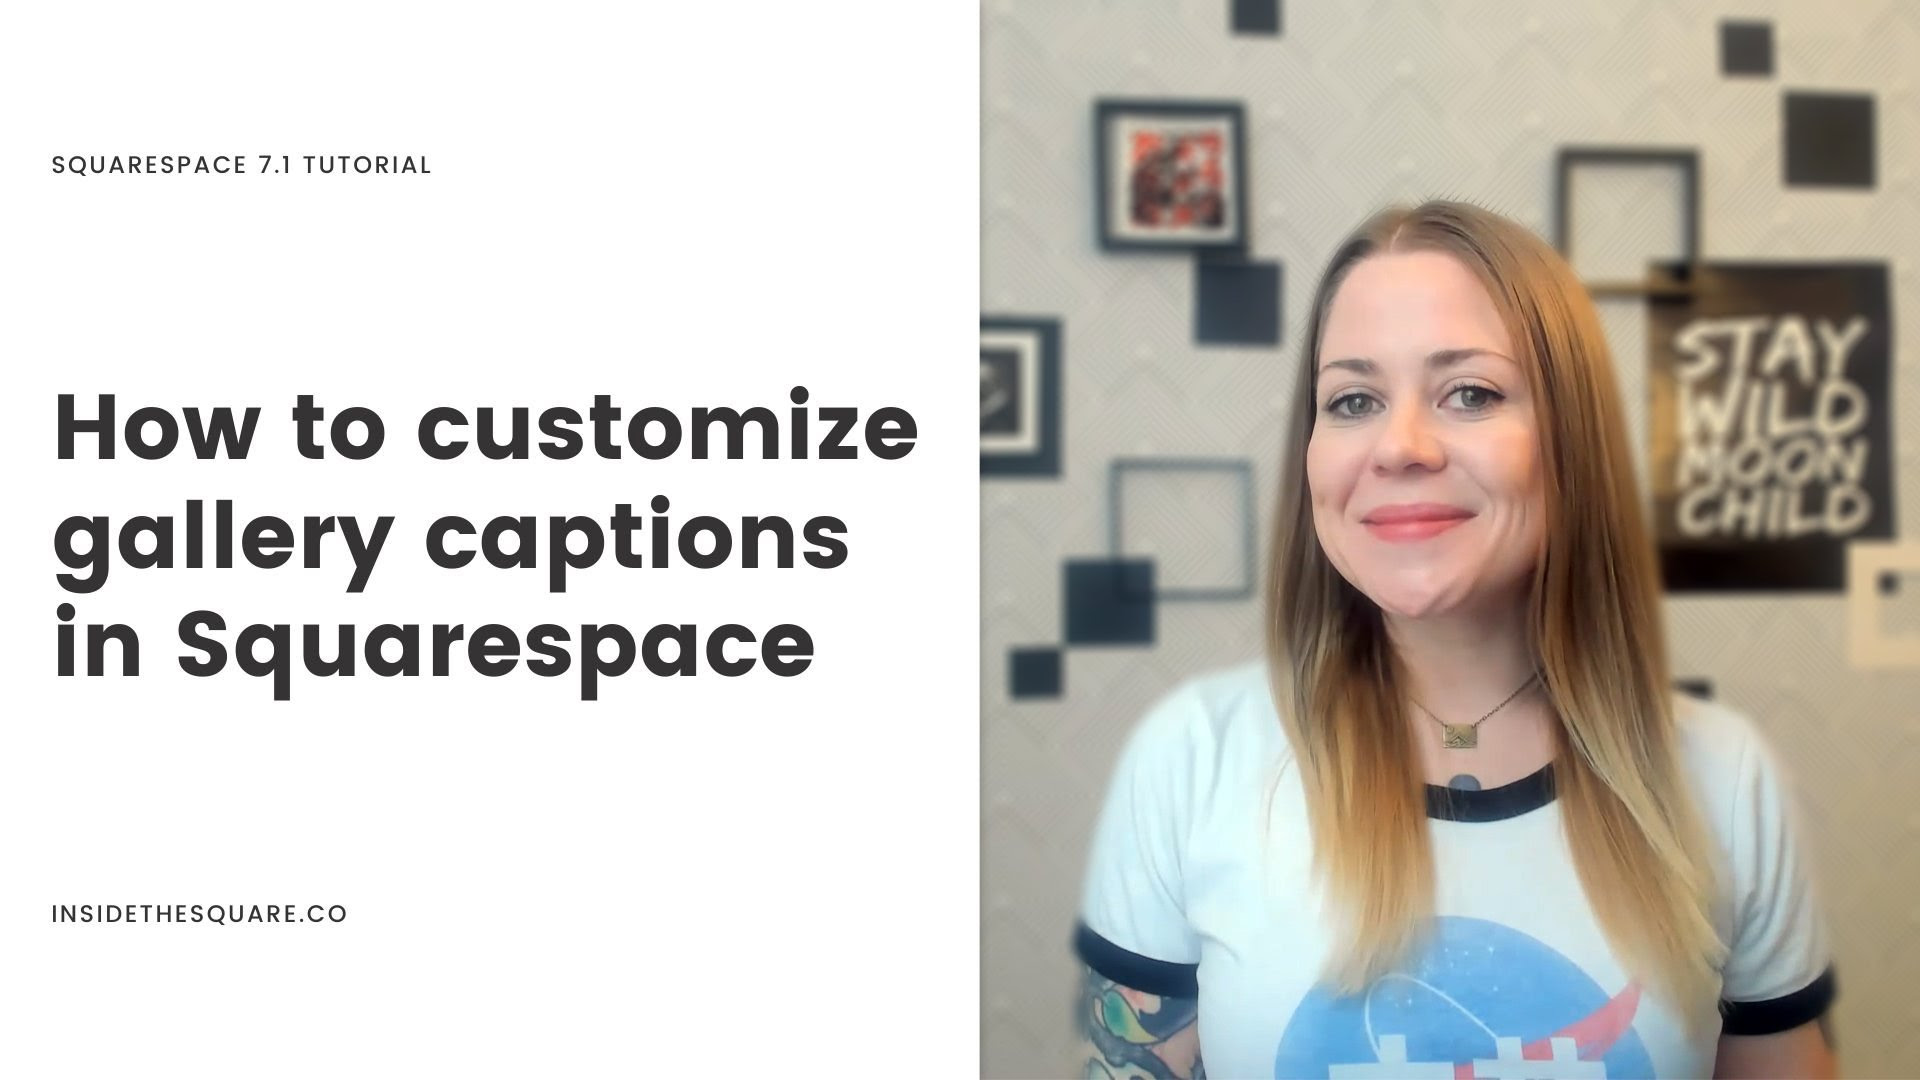 How to customize gallery captions in Squarespace // Squarespace7.1